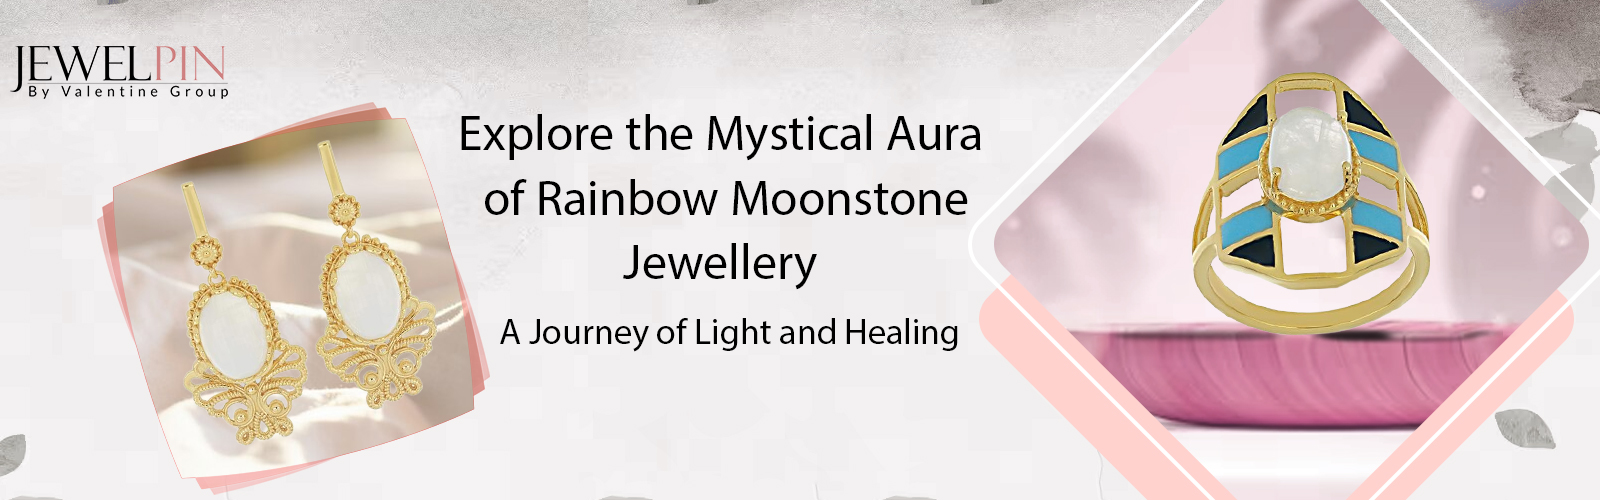 Explore the Mystical Aura of Rainbow Moonstone Jewellery: A Journey of Light and Healing - JewelPin